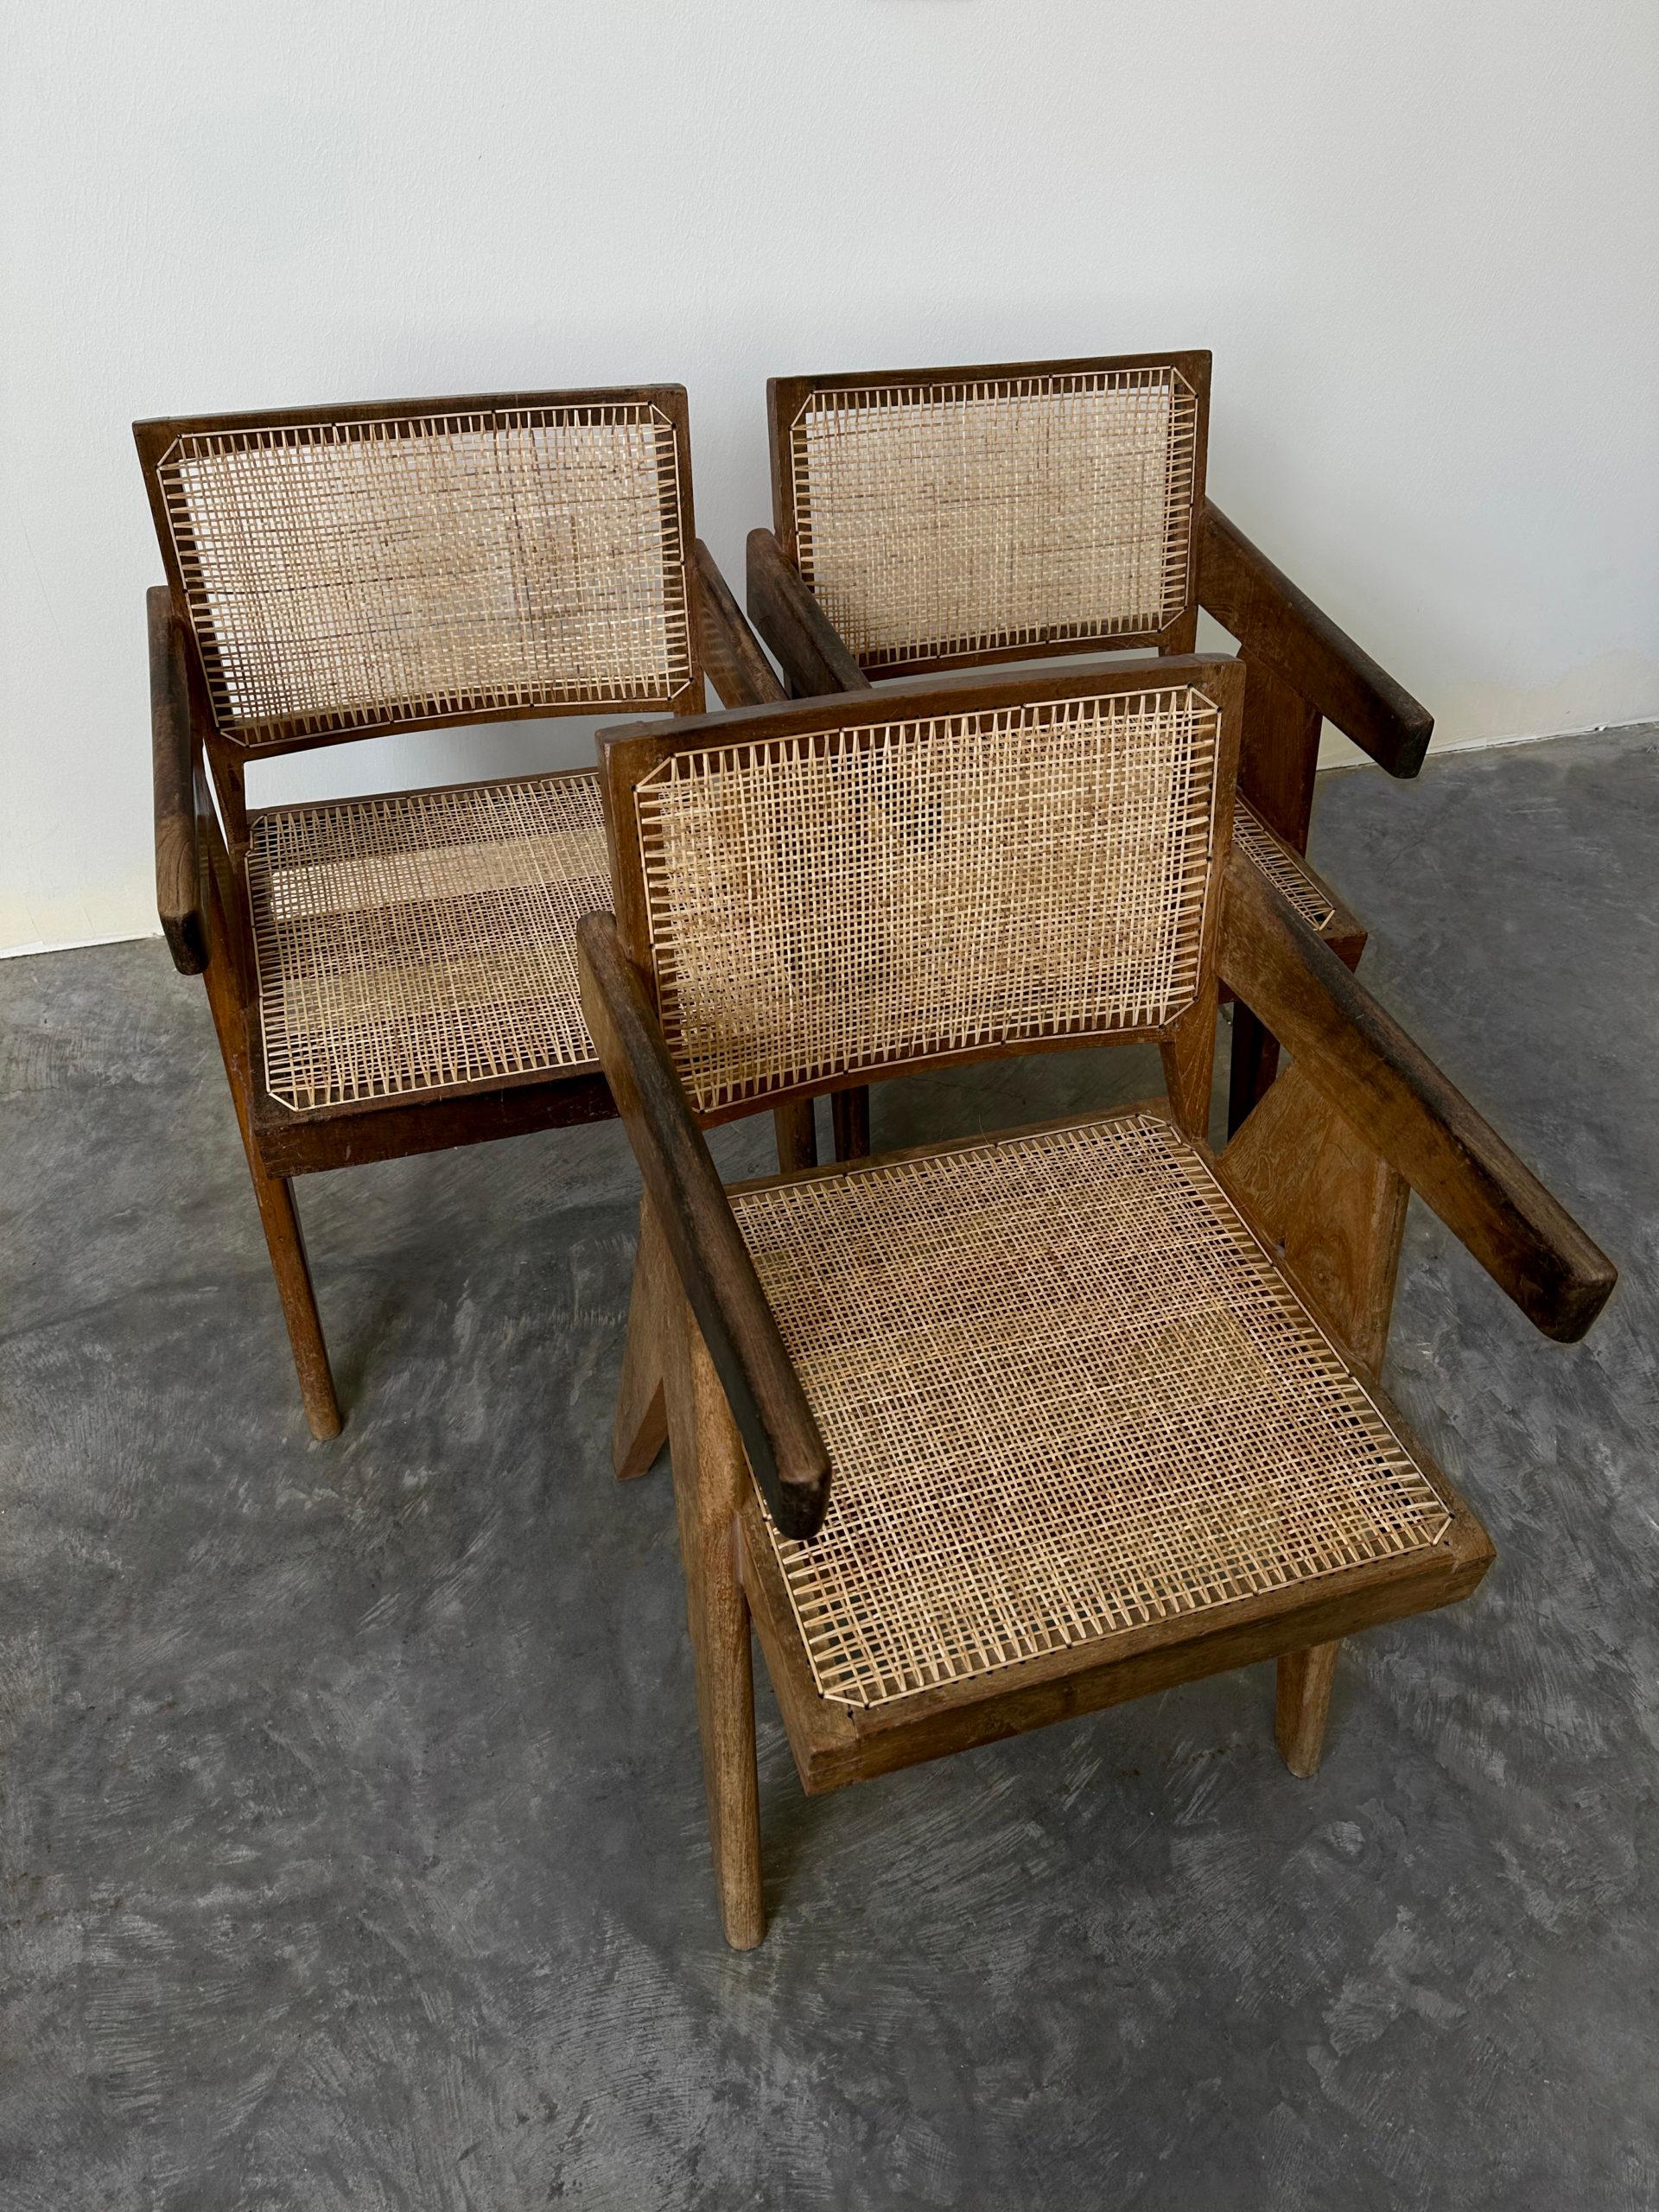 This set of 3 office chairs were used throughout the decades in various administrative buildings in Chandigarh, India. The markings on the back indicate their last designated use and can be removed if requested. Small chips and scratches can be